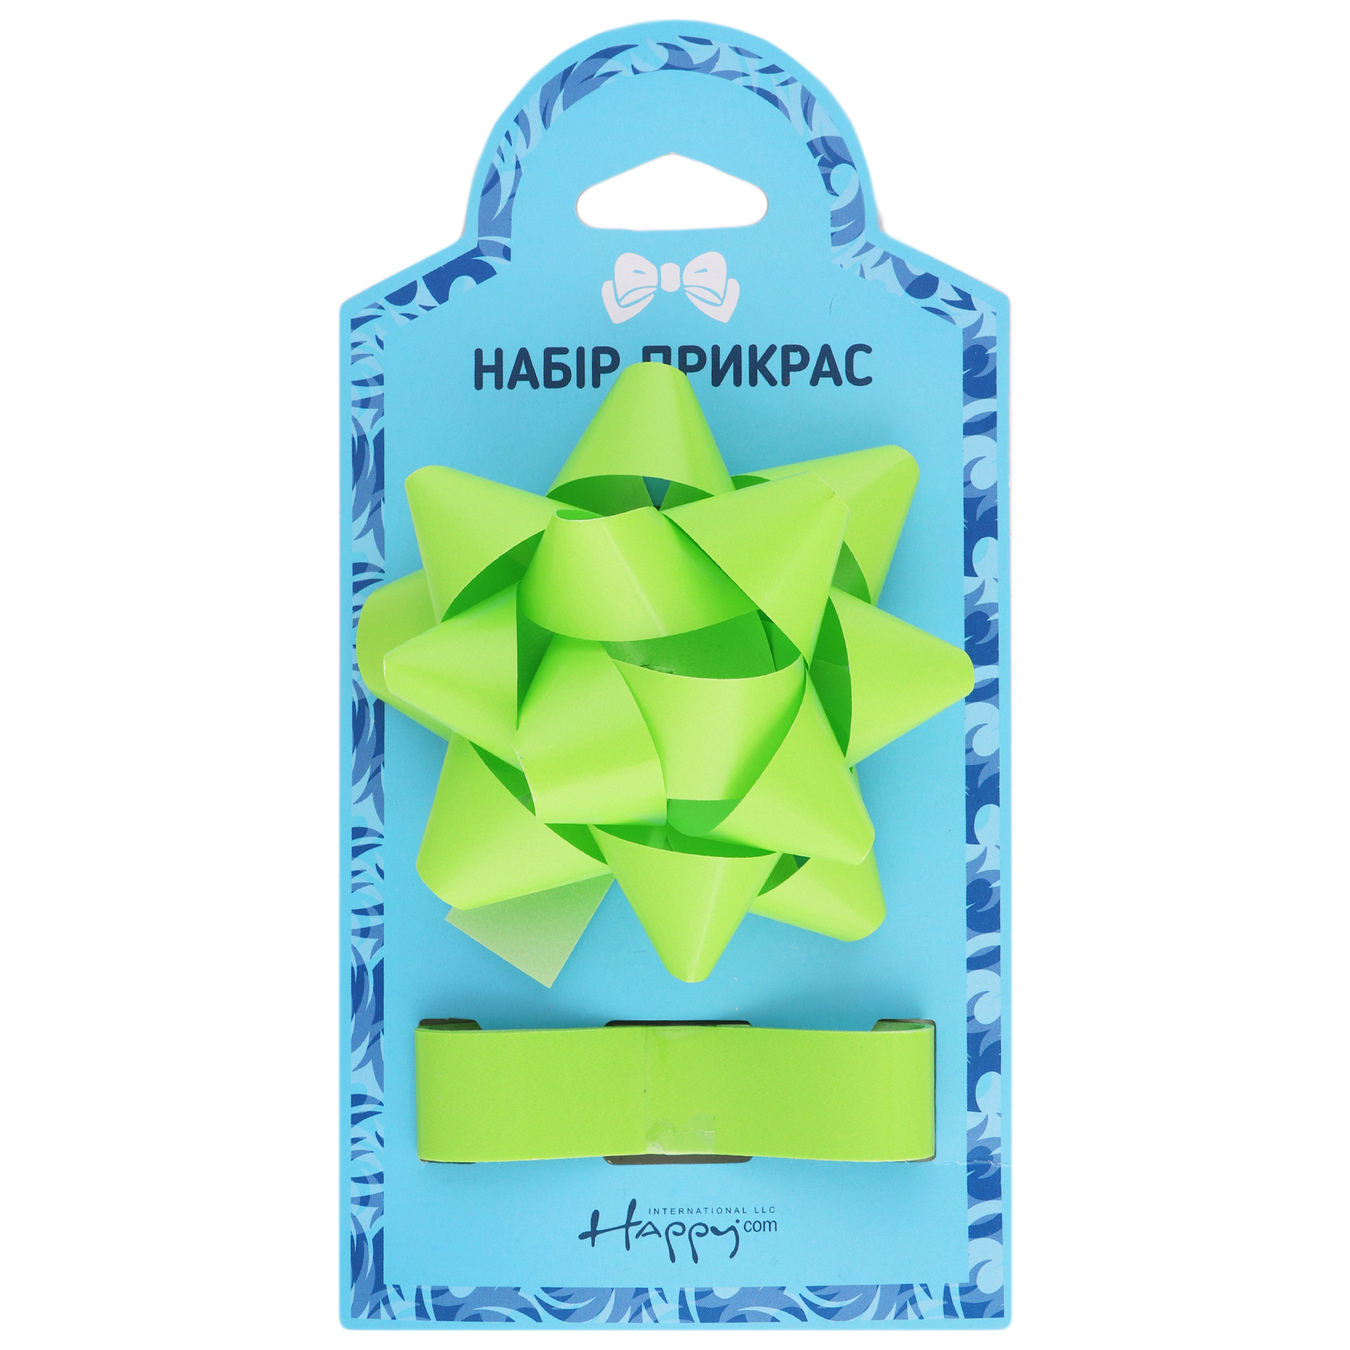 Happycom Eurowrap GalaxyBow decoration for gifts 3